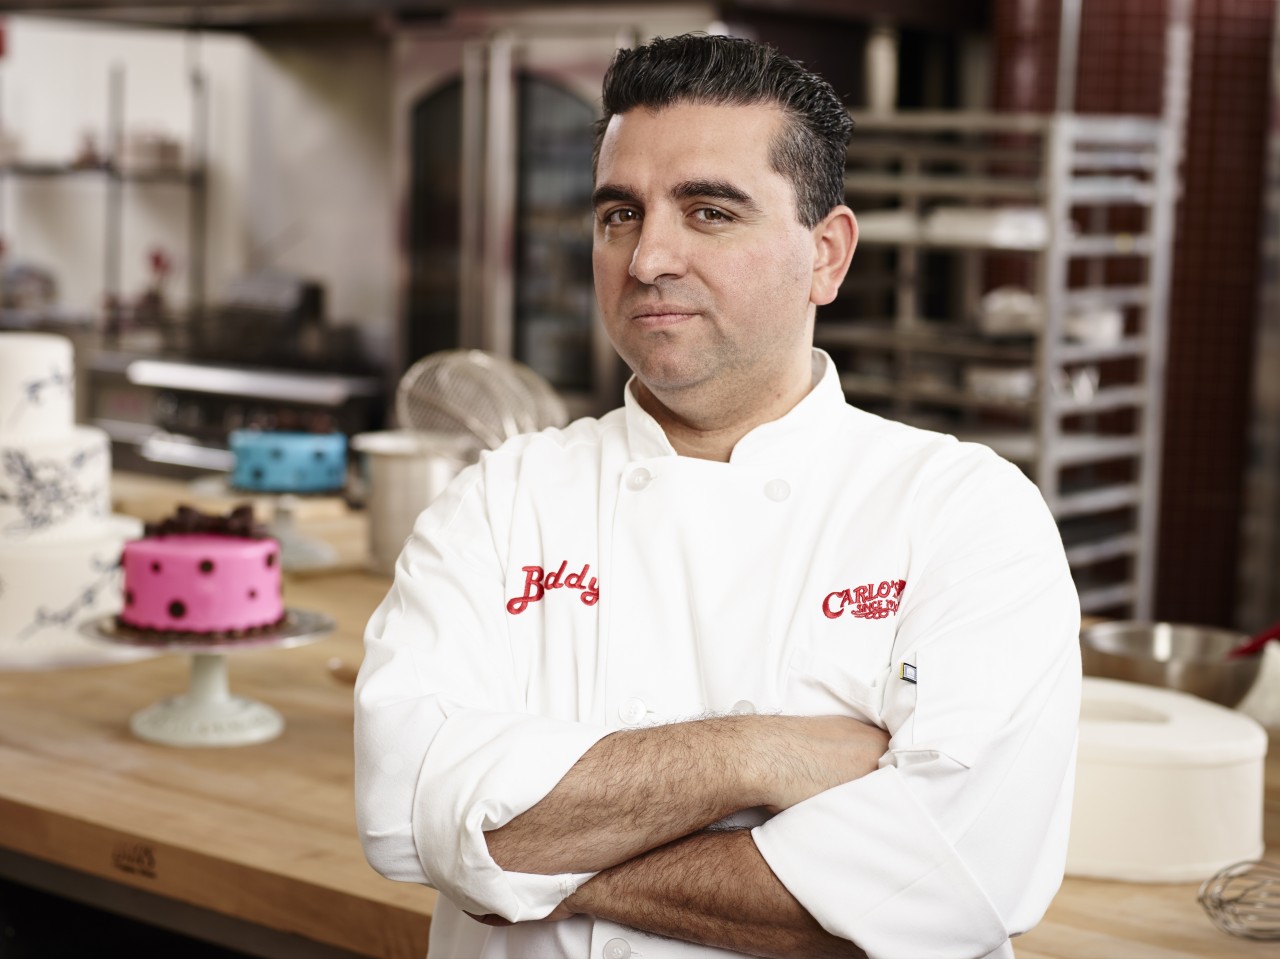 The Cake Boss opening in Canada - Mtltimes.ca